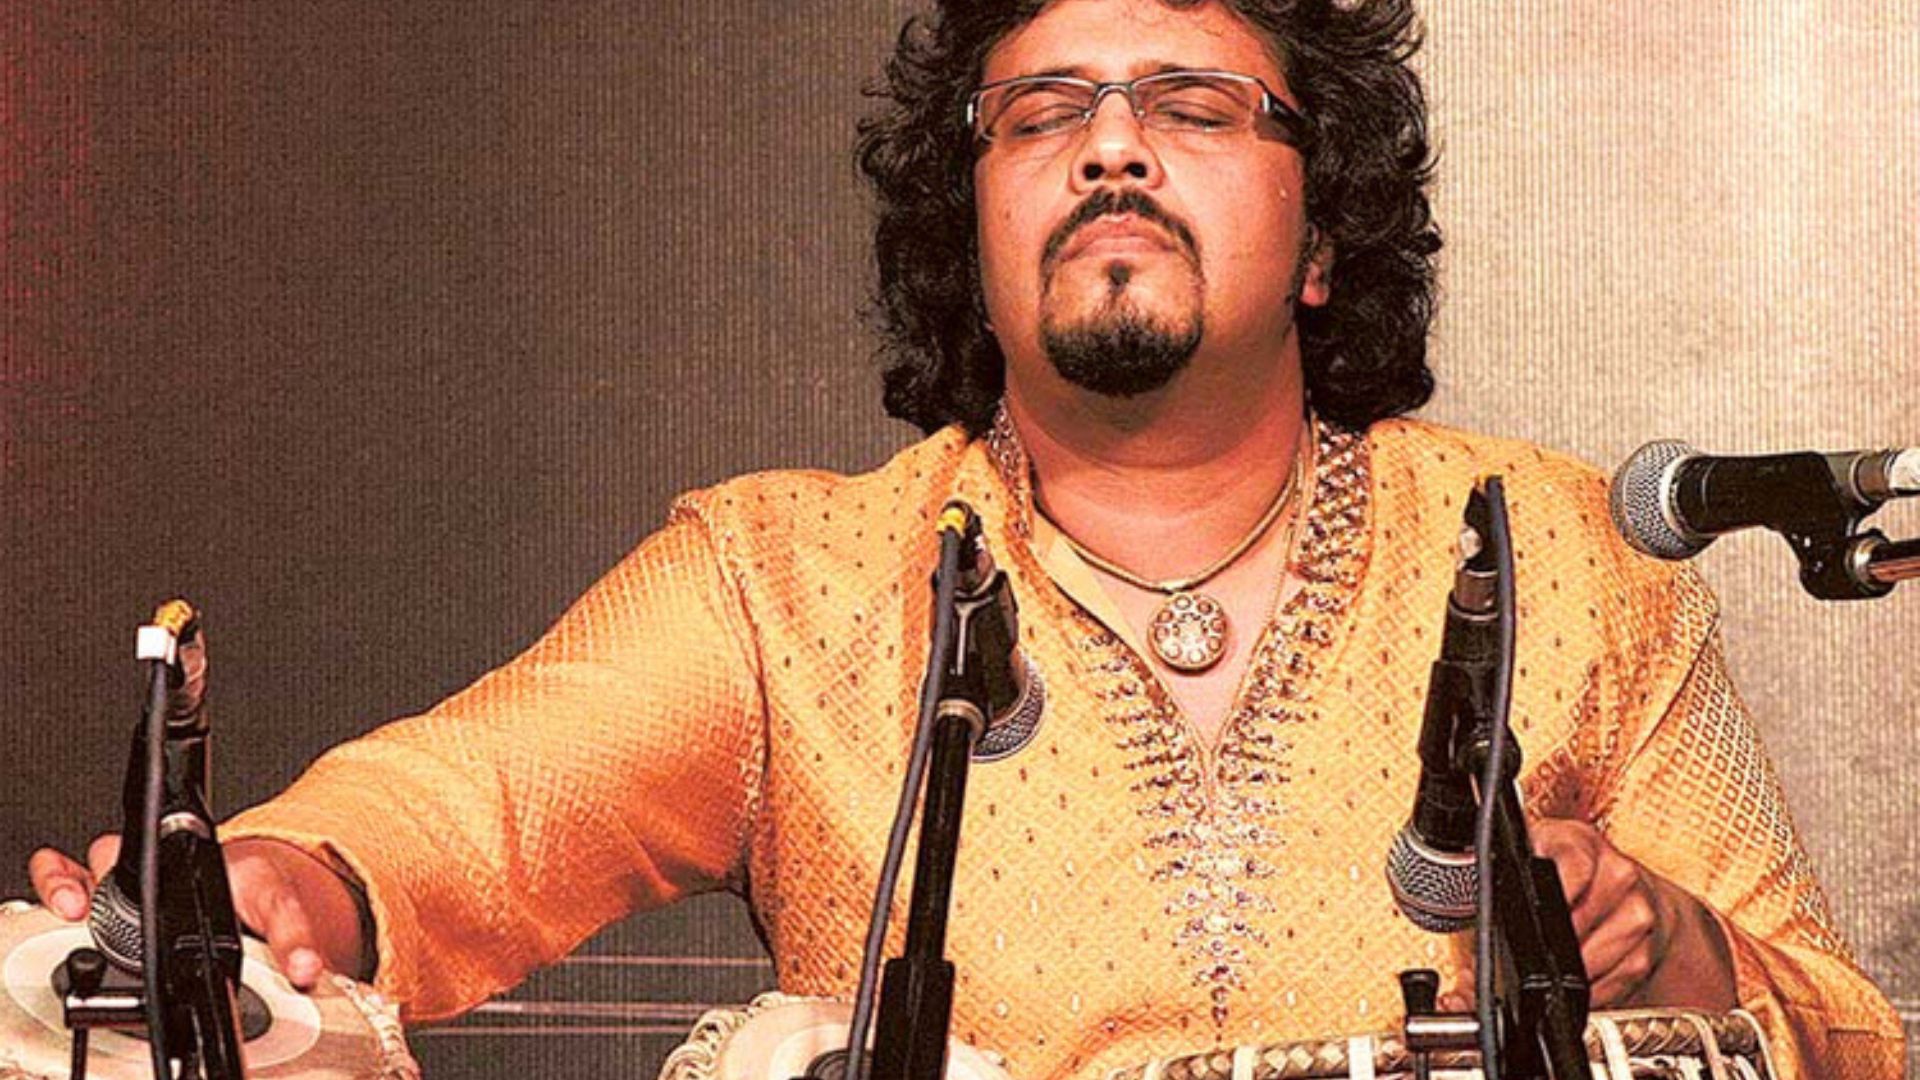 Bickram Ghosh Releases New Track ‘Veer’ with collab from Grammy winner Rakesh Chaurasia